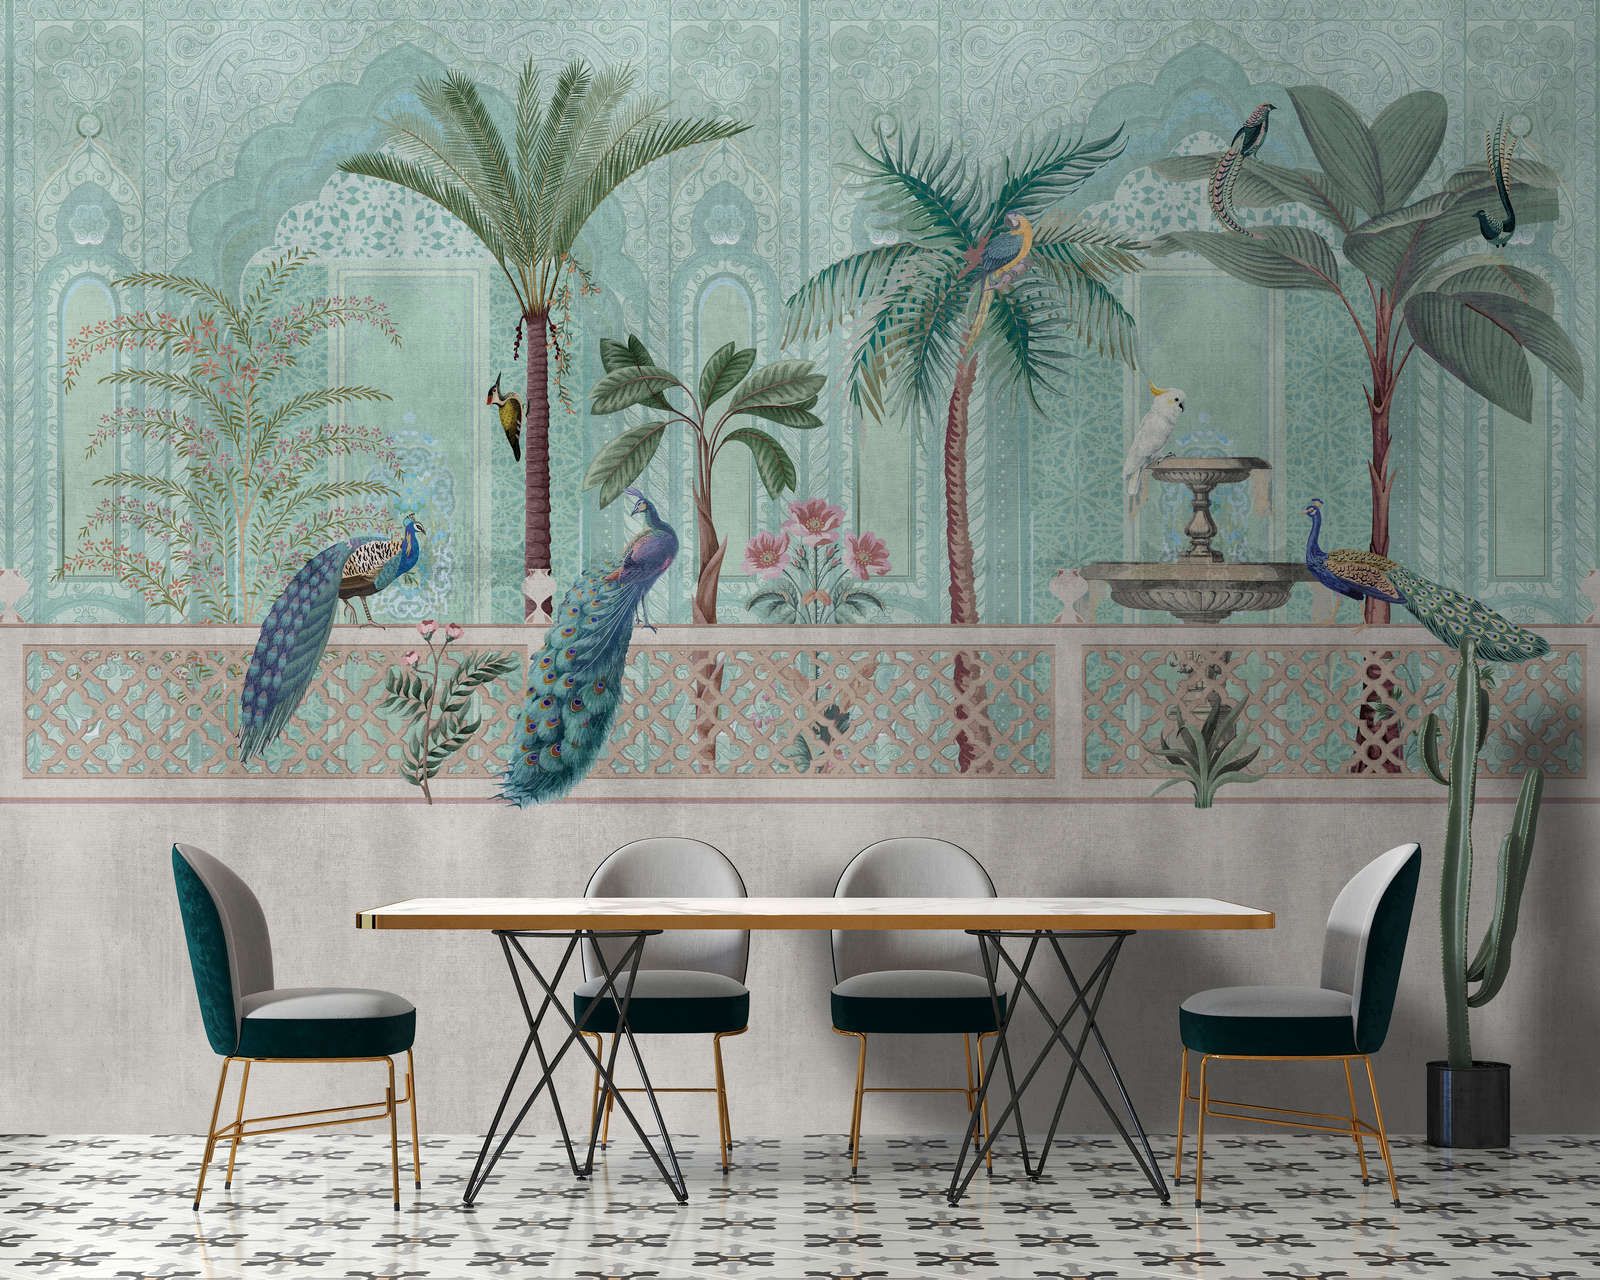             Photo wallpaper »pavo« - Birds, palm trees & fountains - Green, blue with tapestry texture | Smooth, slightly shiny premium non-woven fabric
        